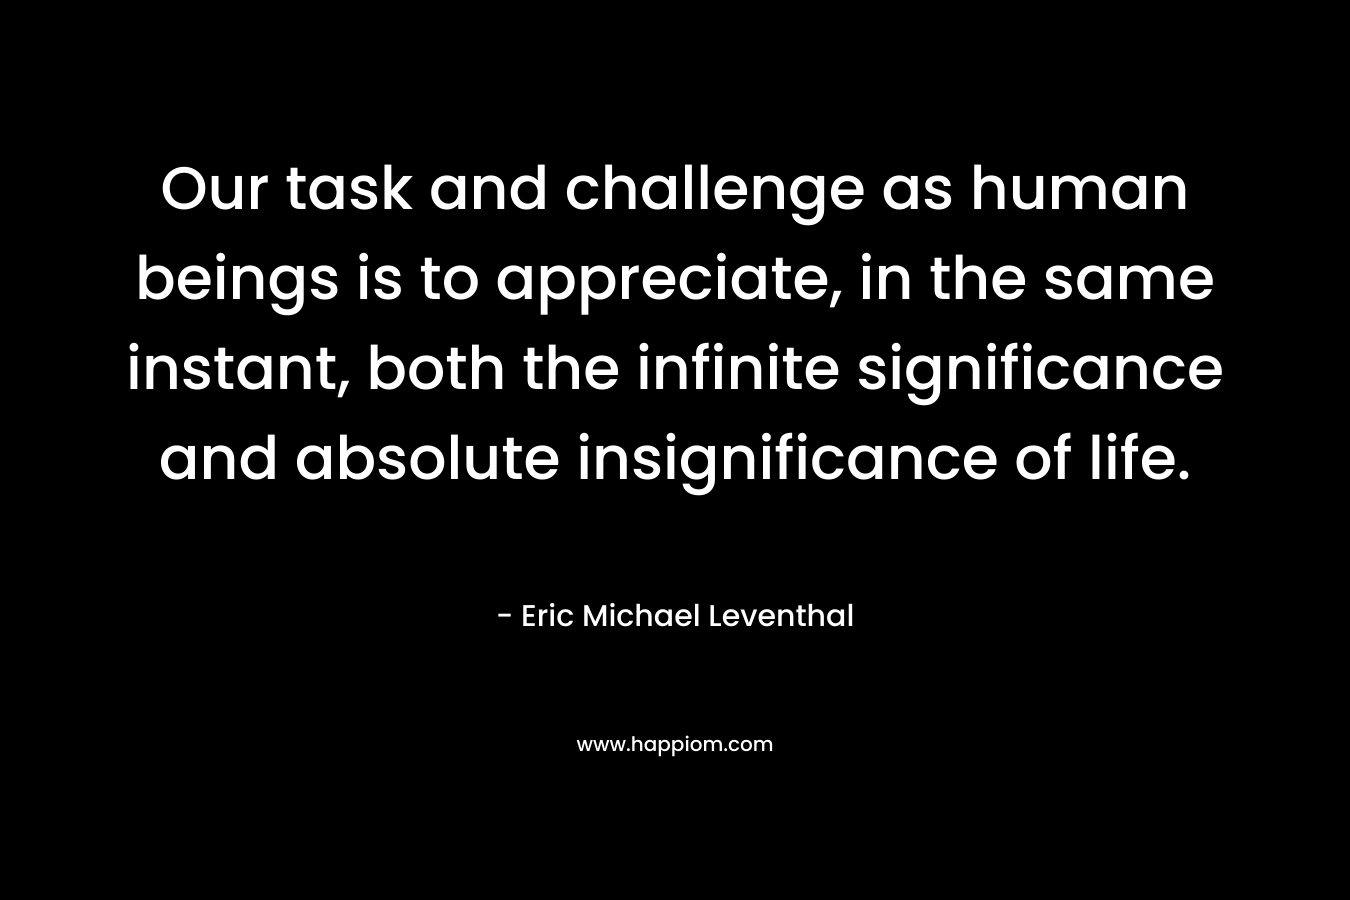 Our task and challenge as human beings is to appreciate, in the same instant, both the infinite significance and absolute insignificance of life. – Eric Michael Leventhal